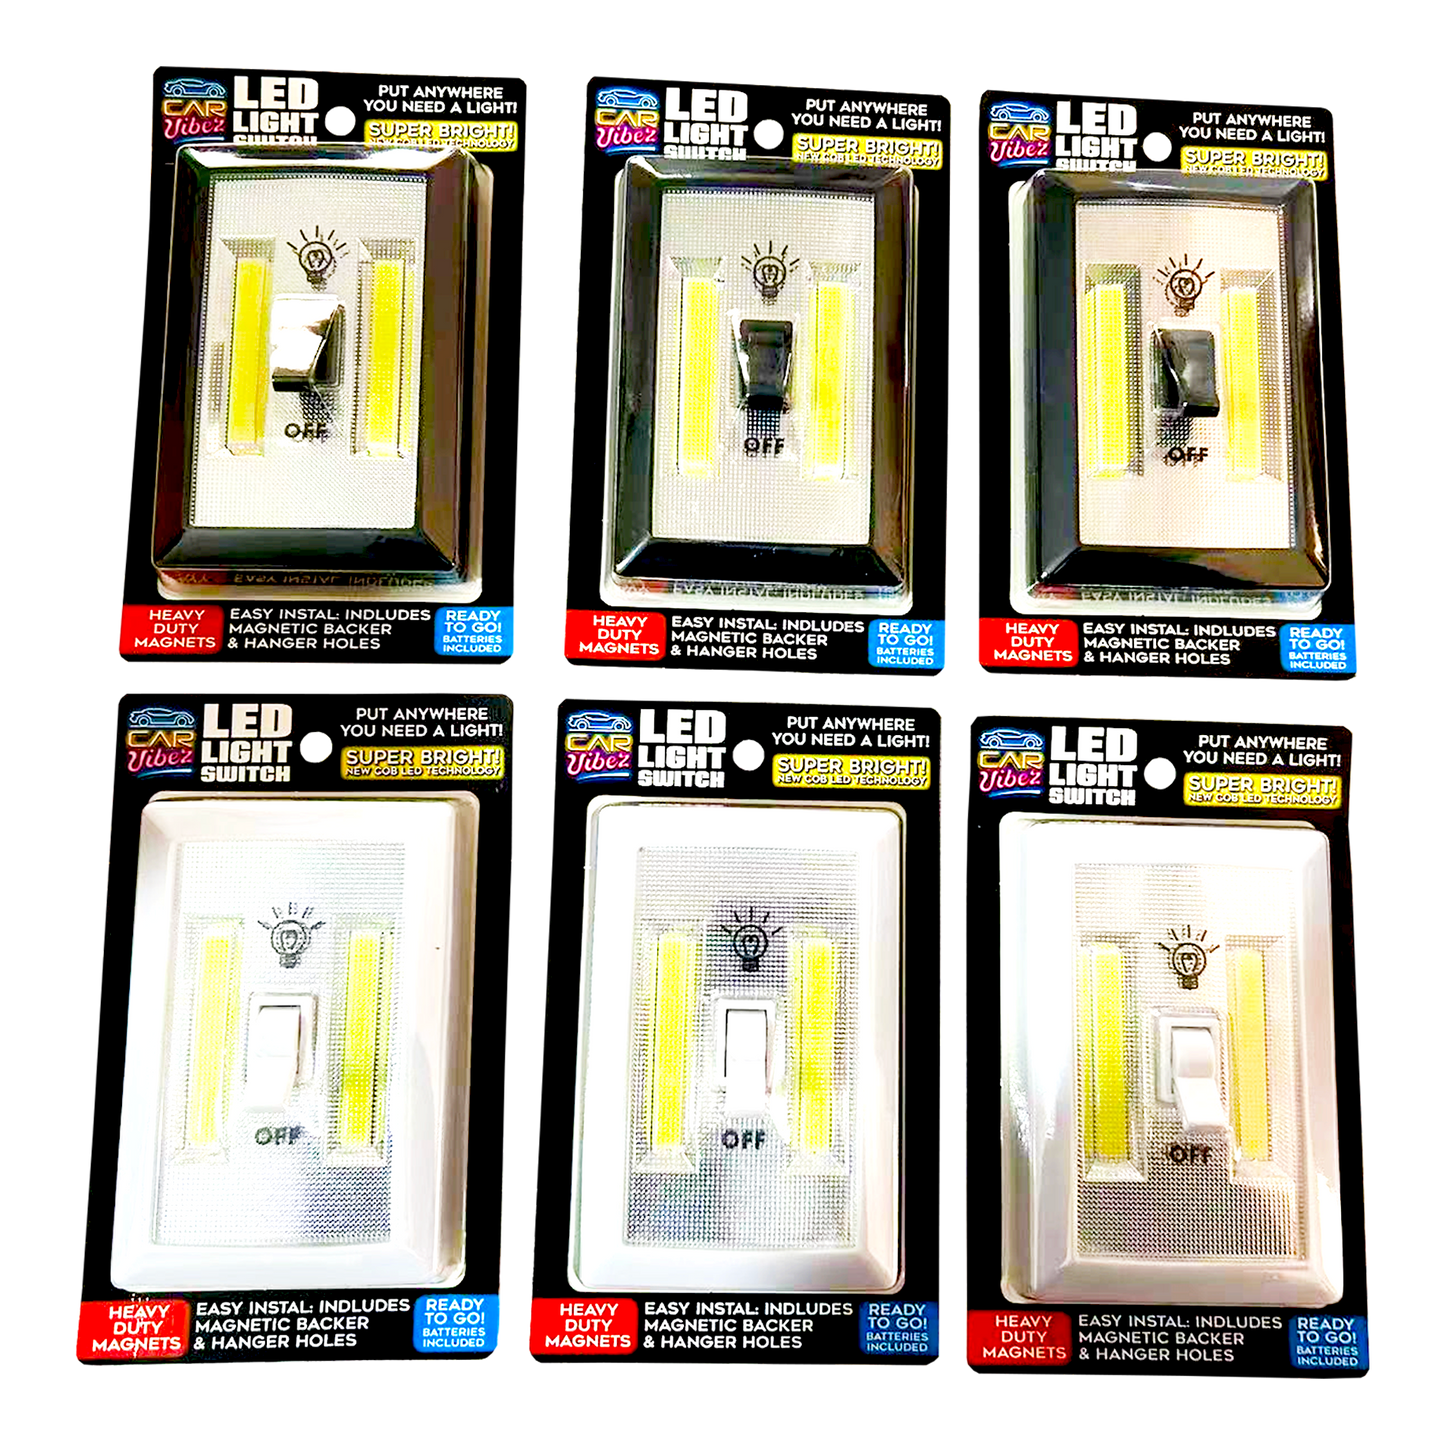 ITEM NUMBER 023692 LIGHT SWITCH 6 PIECES PER DISPLAY